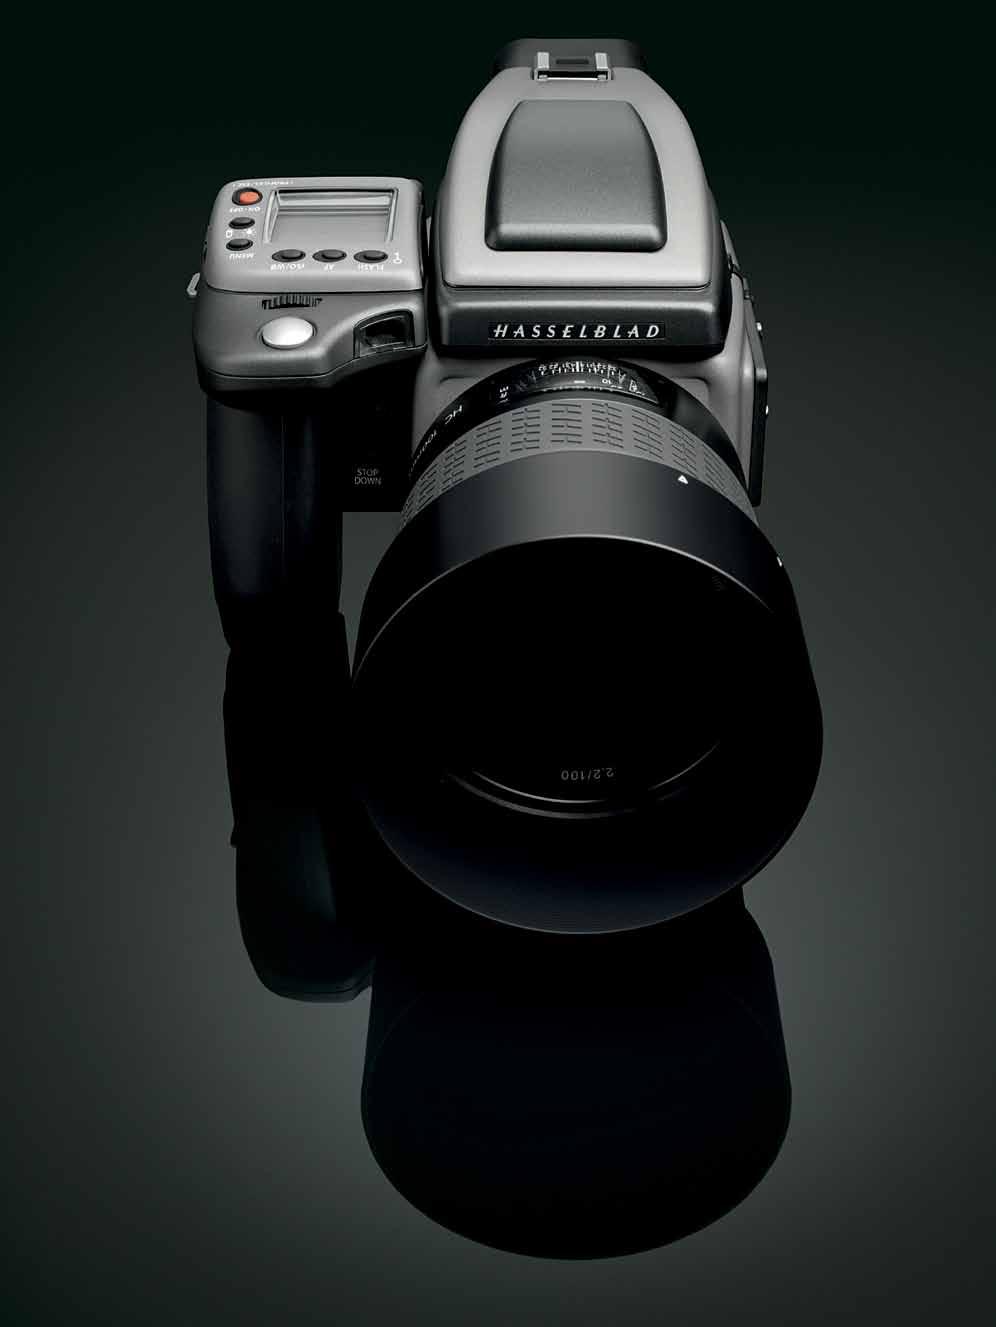 discerning professionals. H4D cameras range from 31 to 60 megapixels and, with our unique Multi- Shot platform, the latest Hasselblad invention, a whopping 200 megapixels!